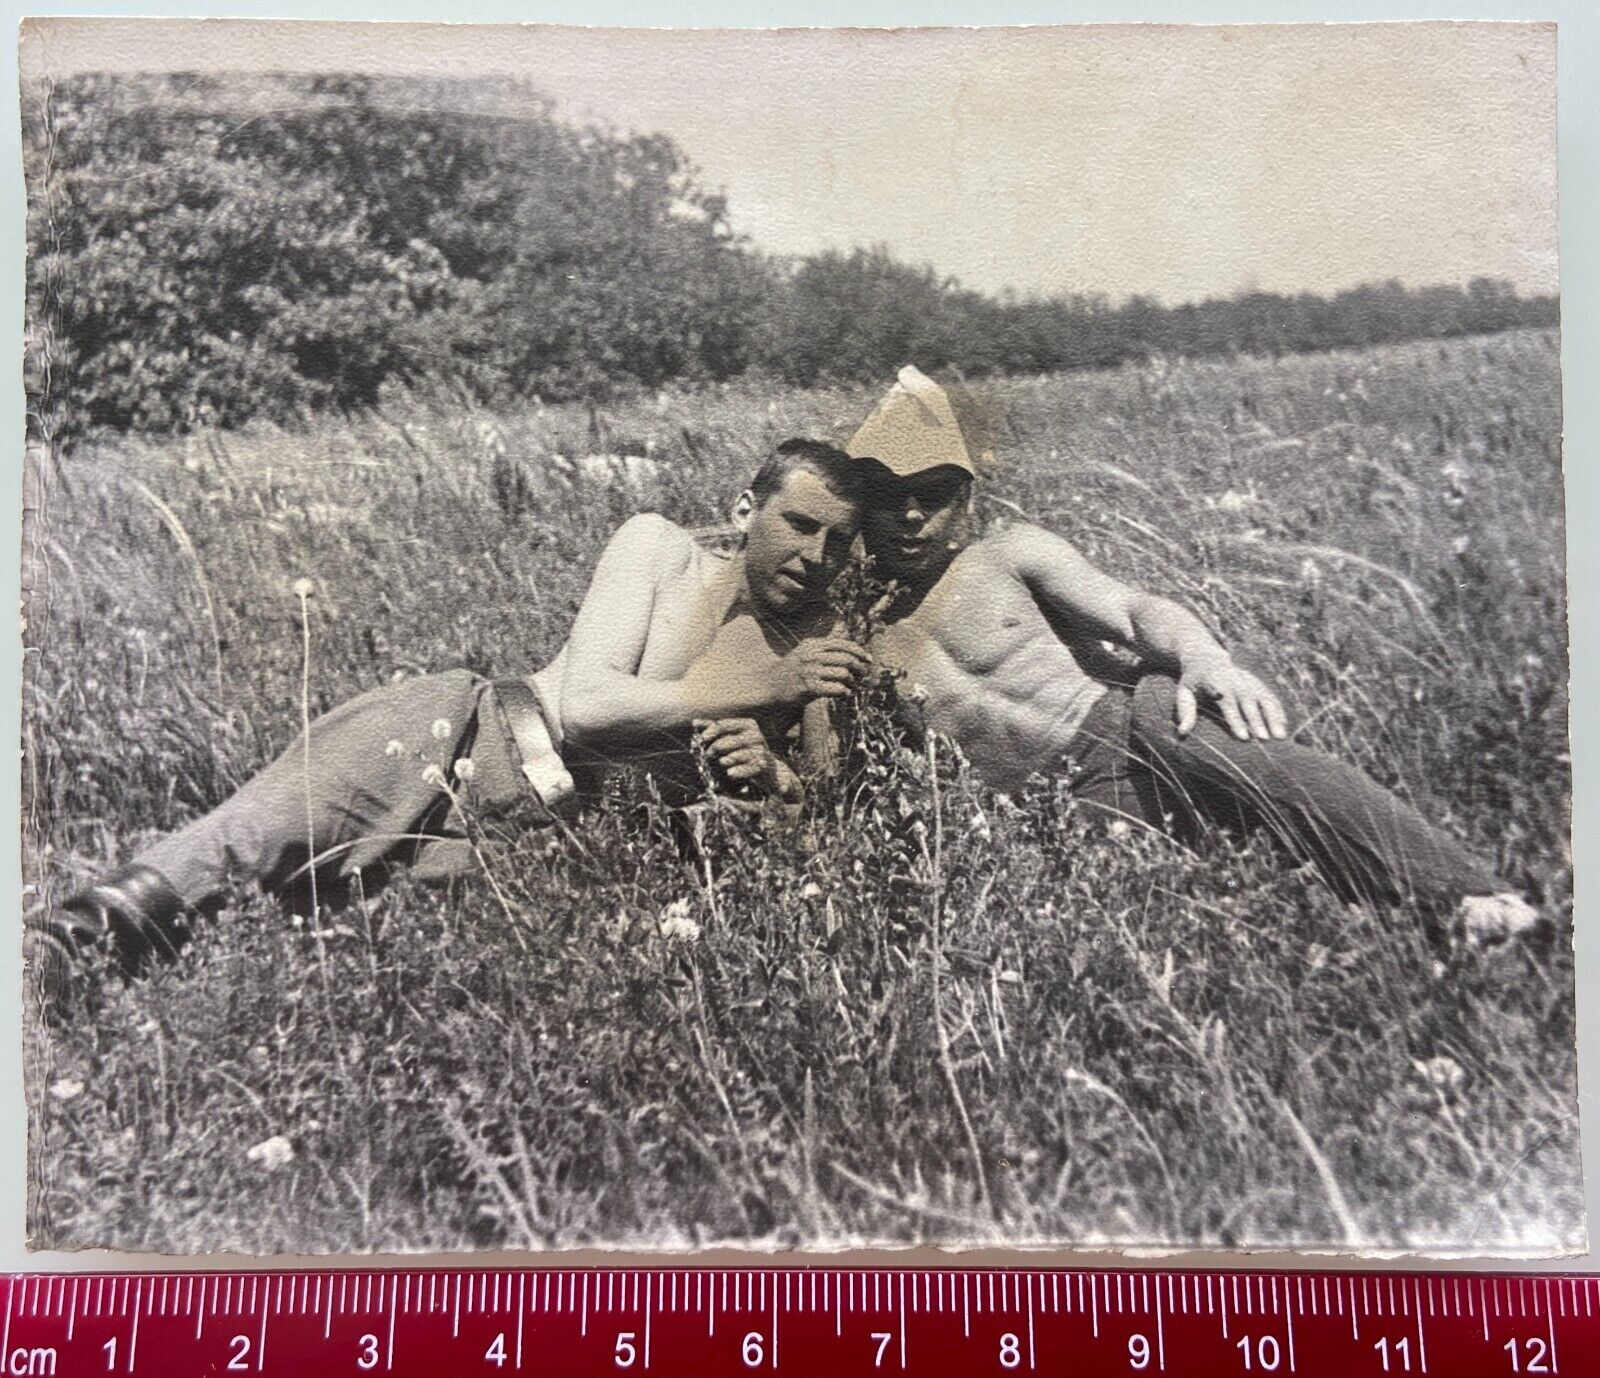 Shirtless Couple Men Beefcake Affectionate Young Guys Gay Interest Vintage Photo